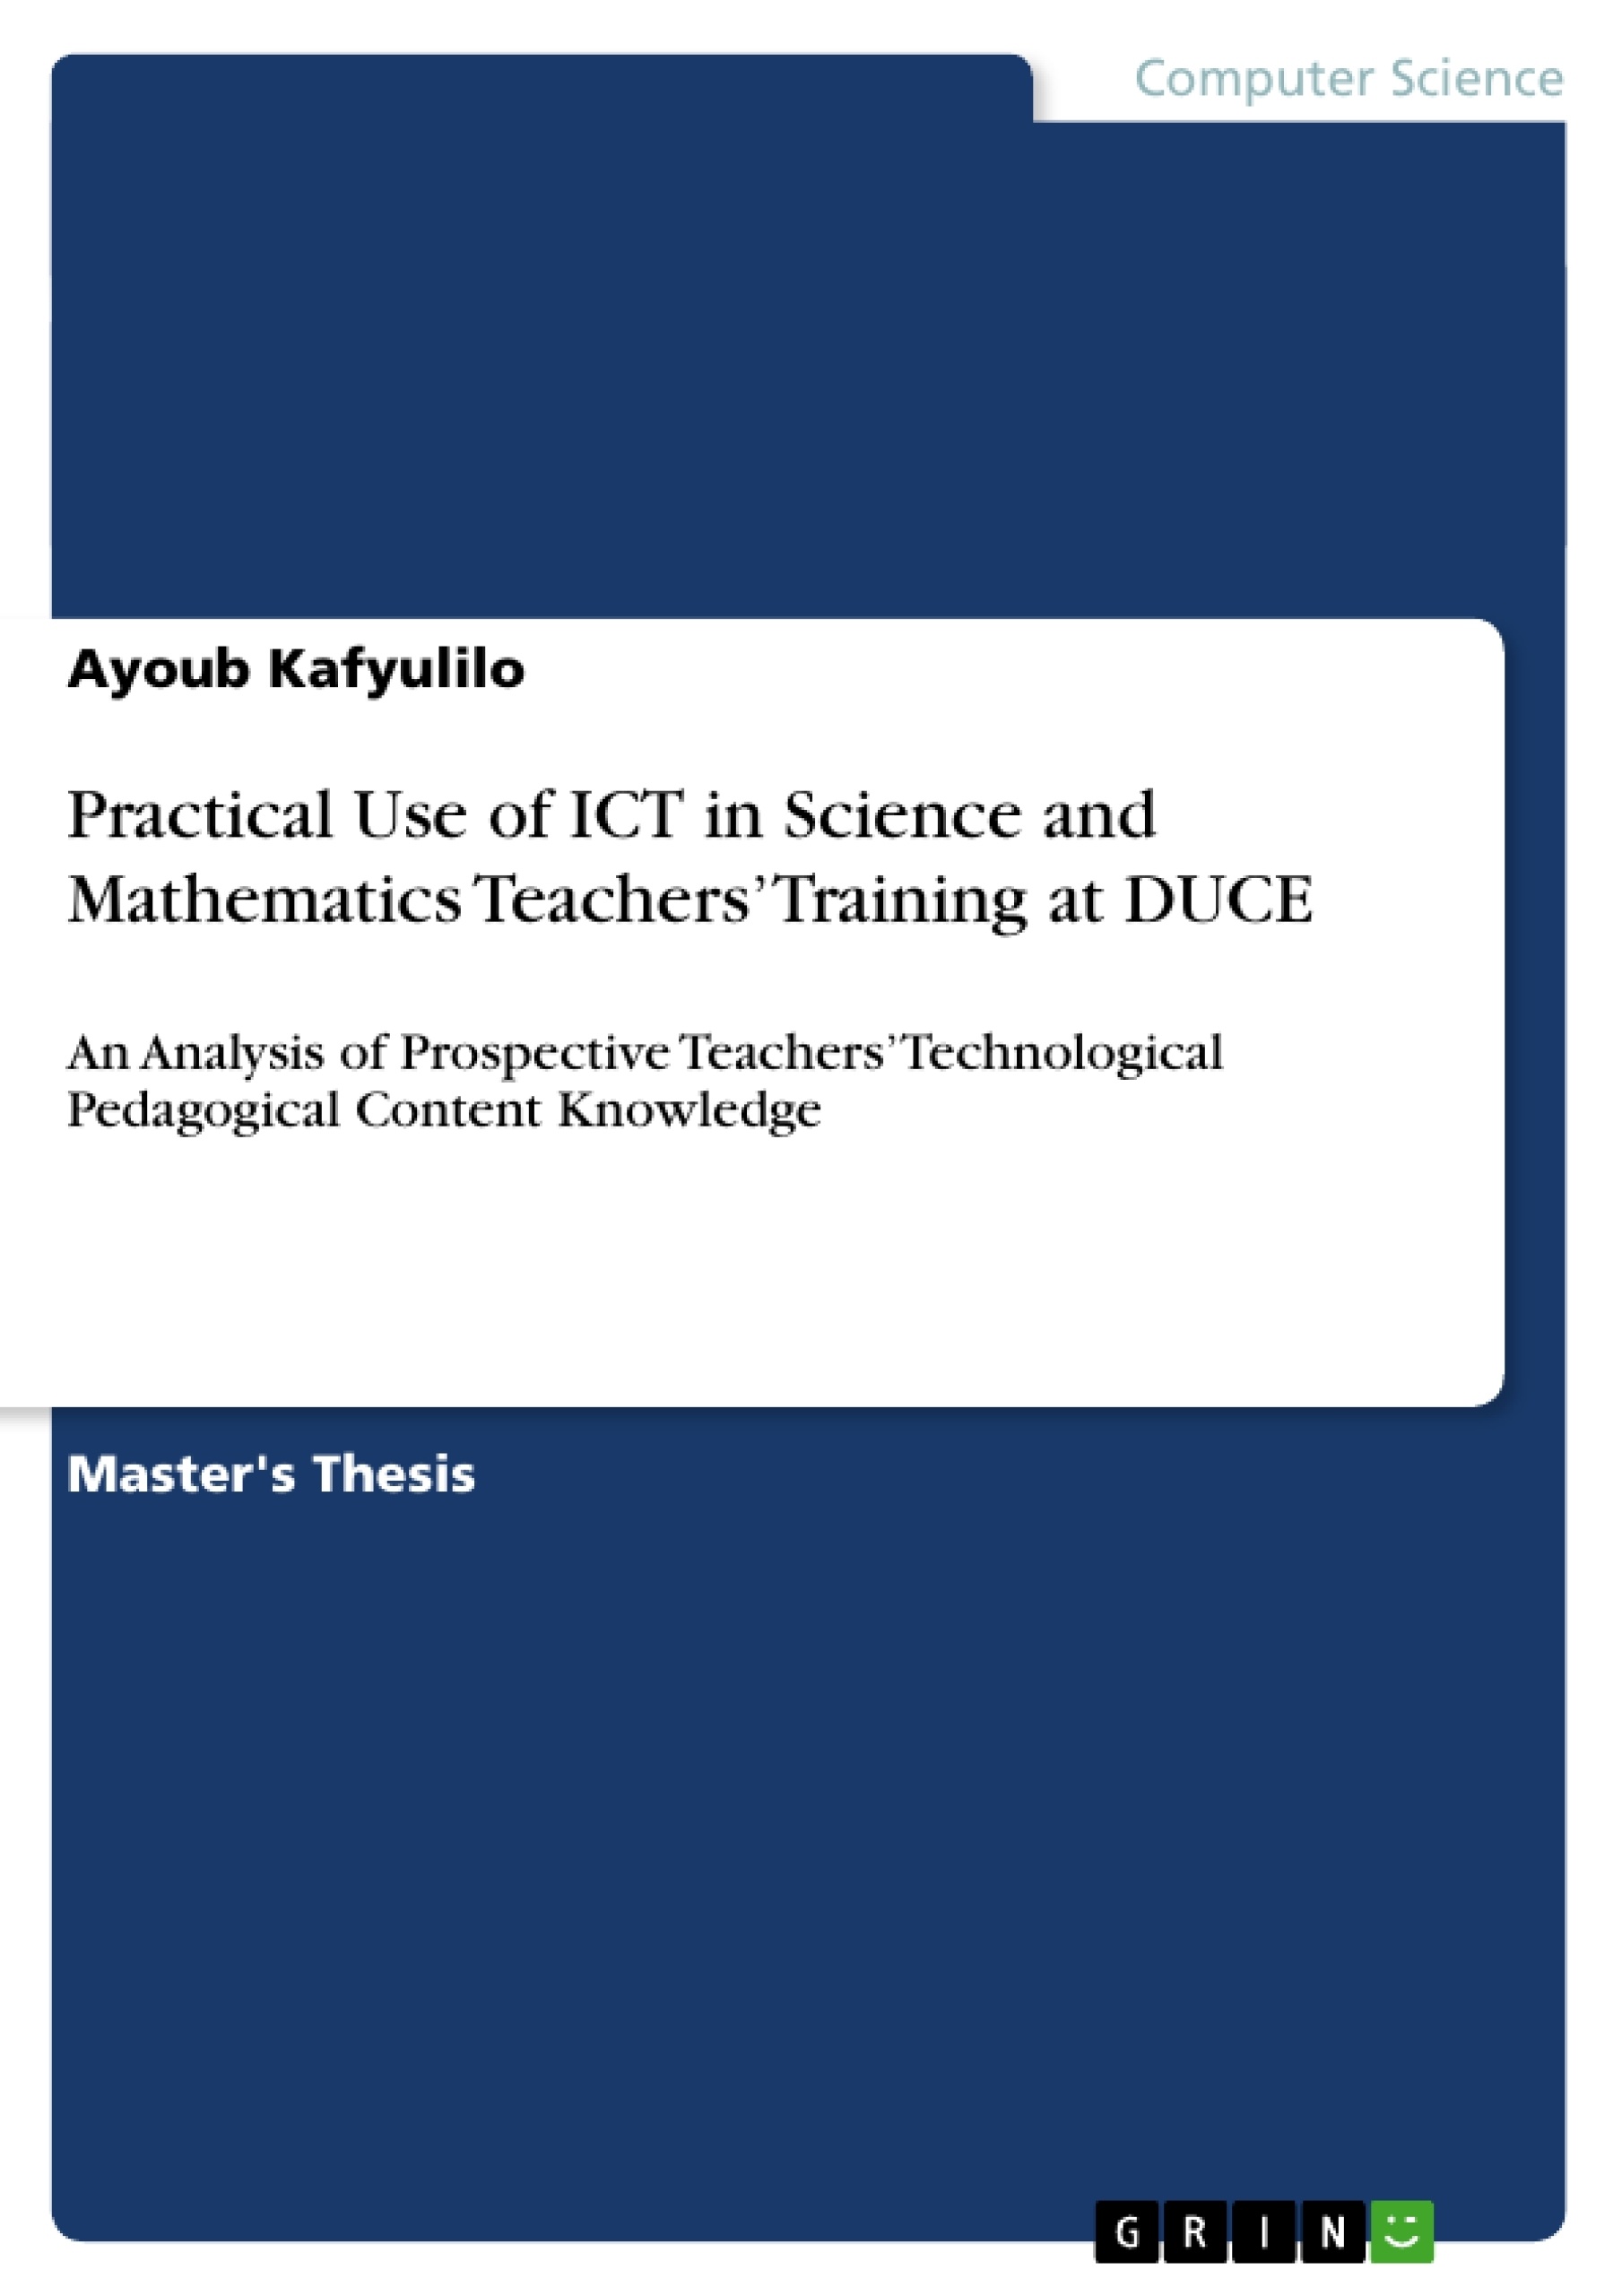 Title: Practical Use of ICT in Science and Mathematics Teachers’ Training at DUCE